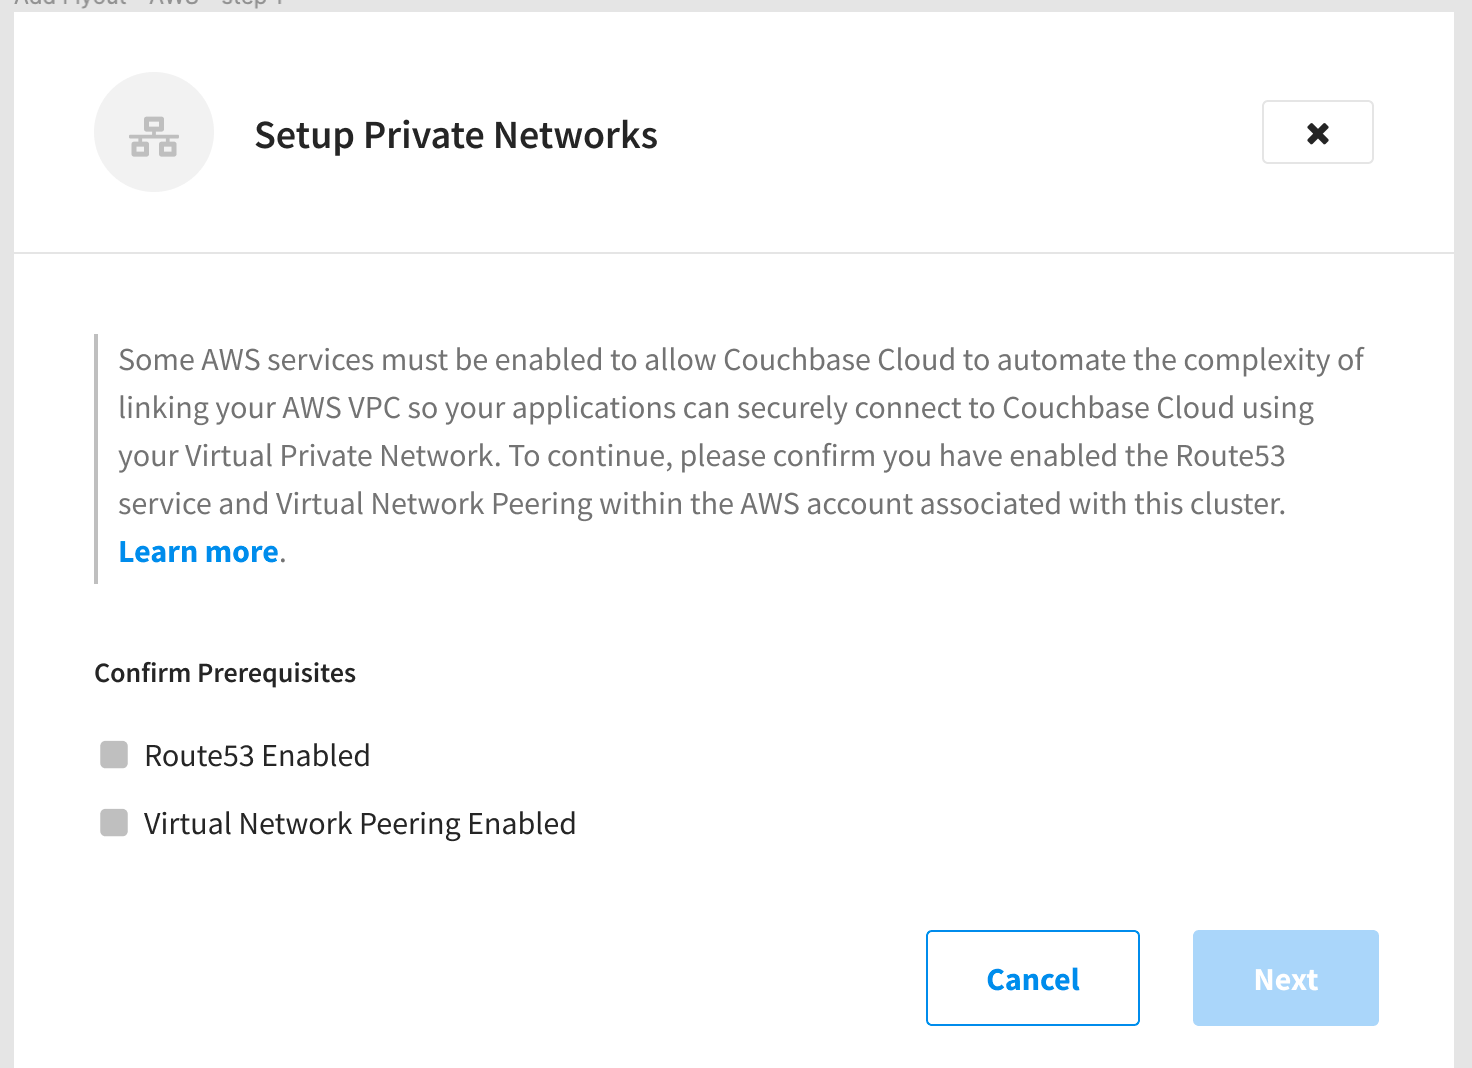 Select the checkboxed to confirm that you have enabled Route53 and Virtual Network Peering in your AWS acount, and then click Submit.